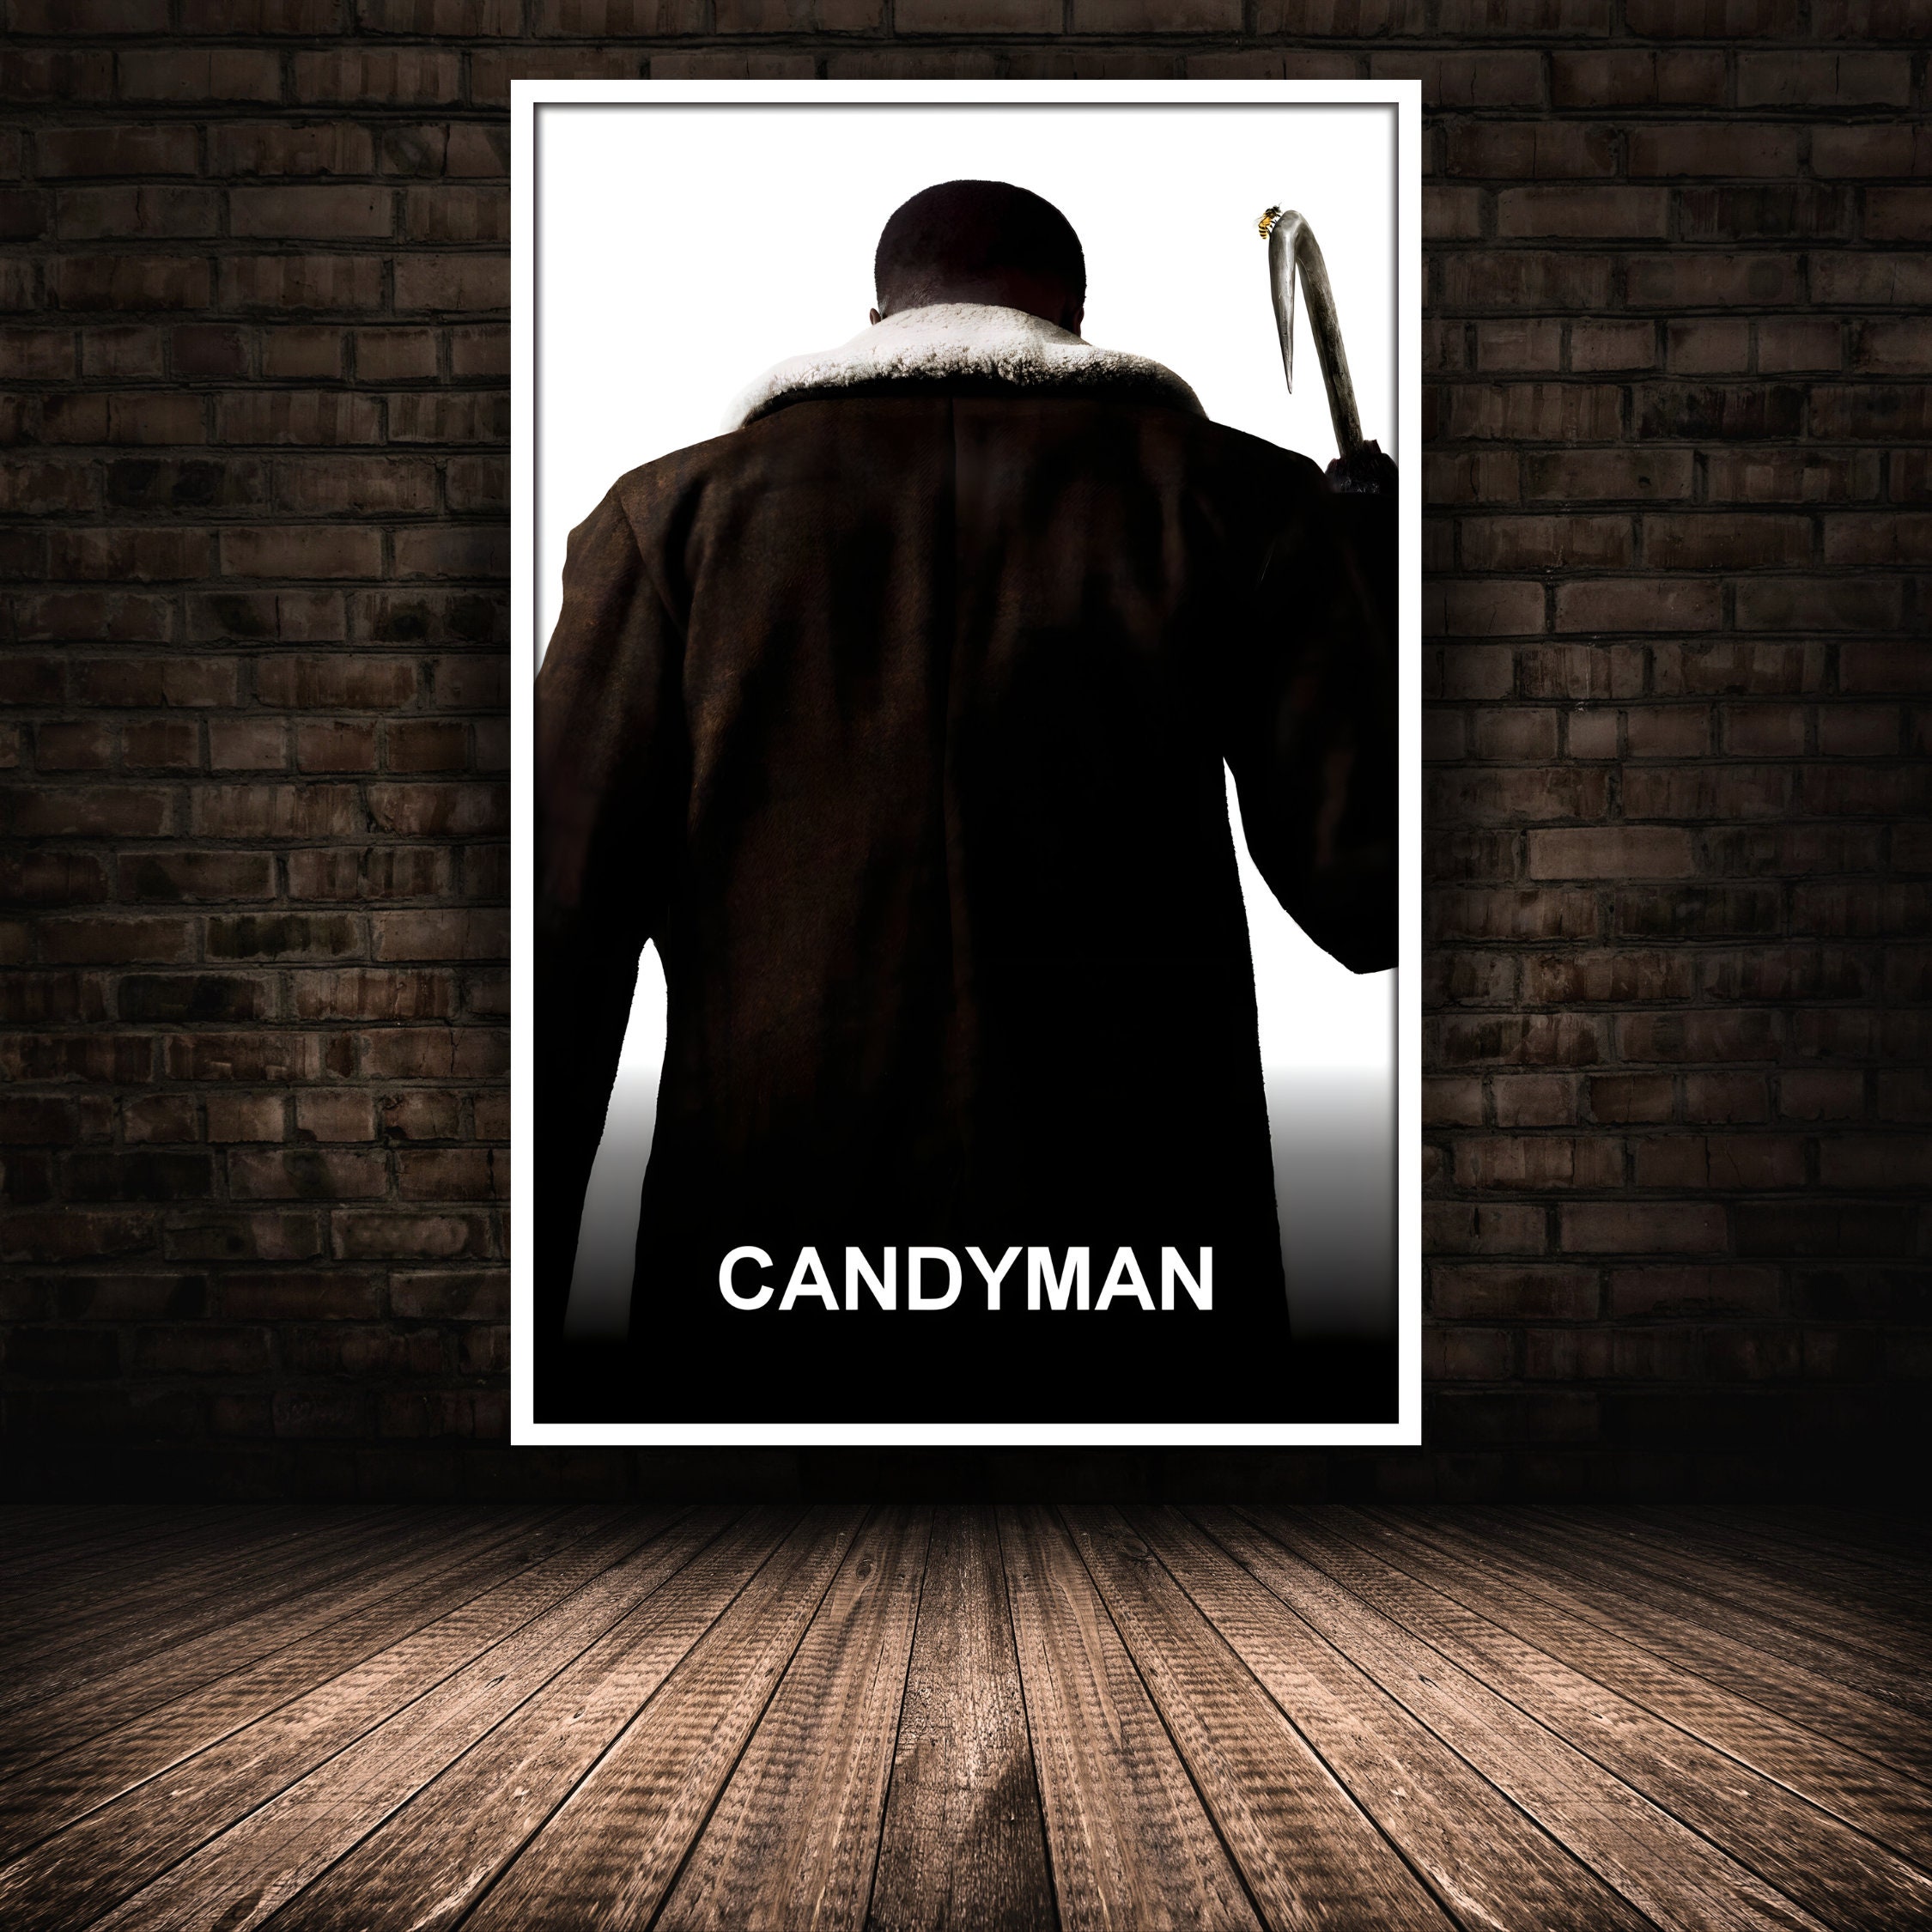 Tony Todd on Frankenstein, Candyman and the art of creating